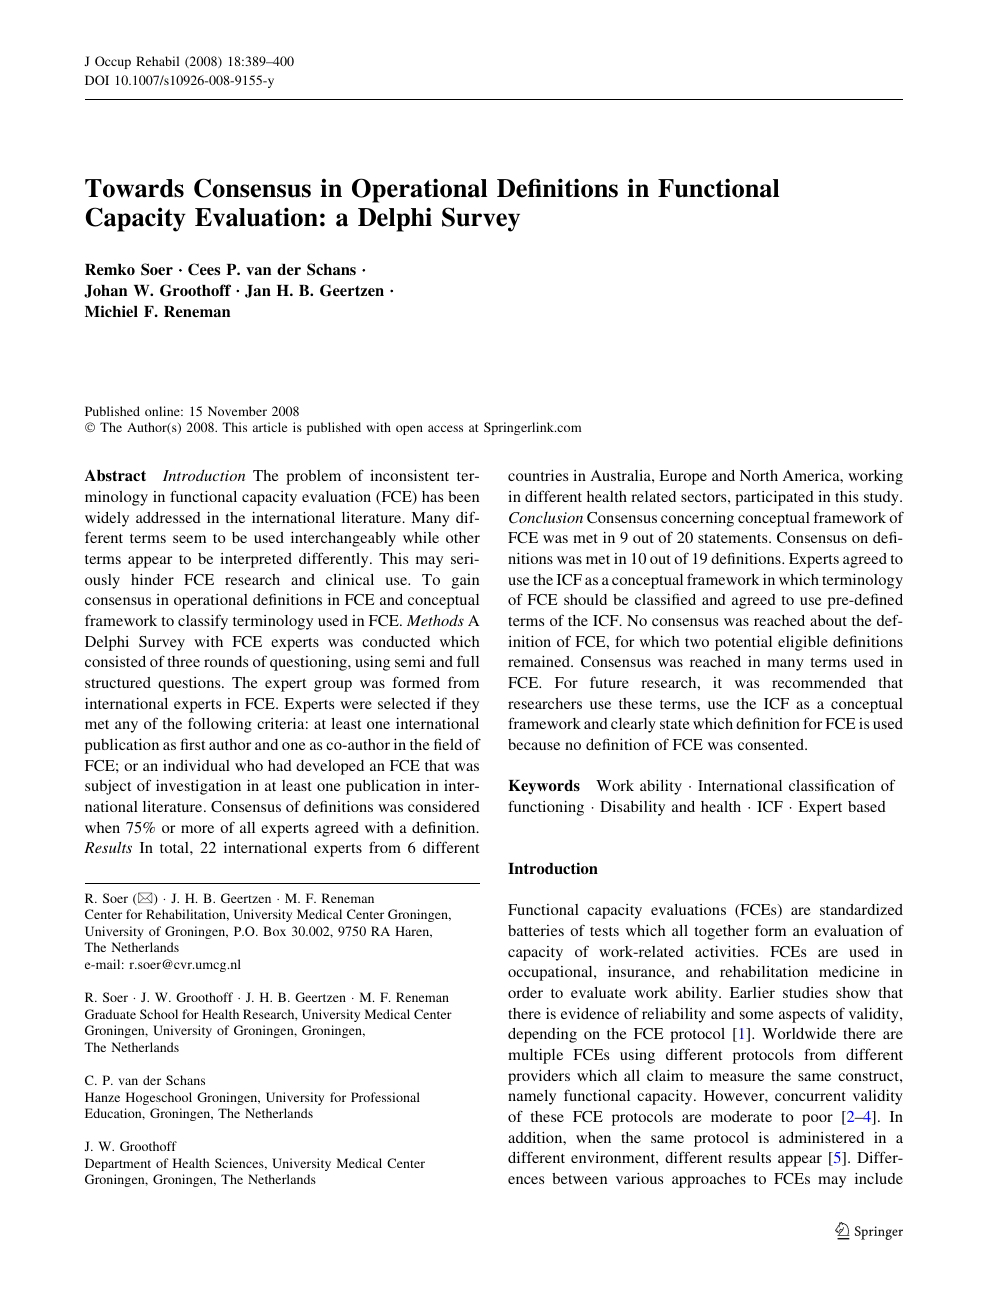 Towards Consensus In Operational Definitions In Functional Capacity Evaluation A Delphi Survey Topic Of Research Paper In Economics And Business Download Scholarly Article Pdf And Read For Free On Cyberleninka Open